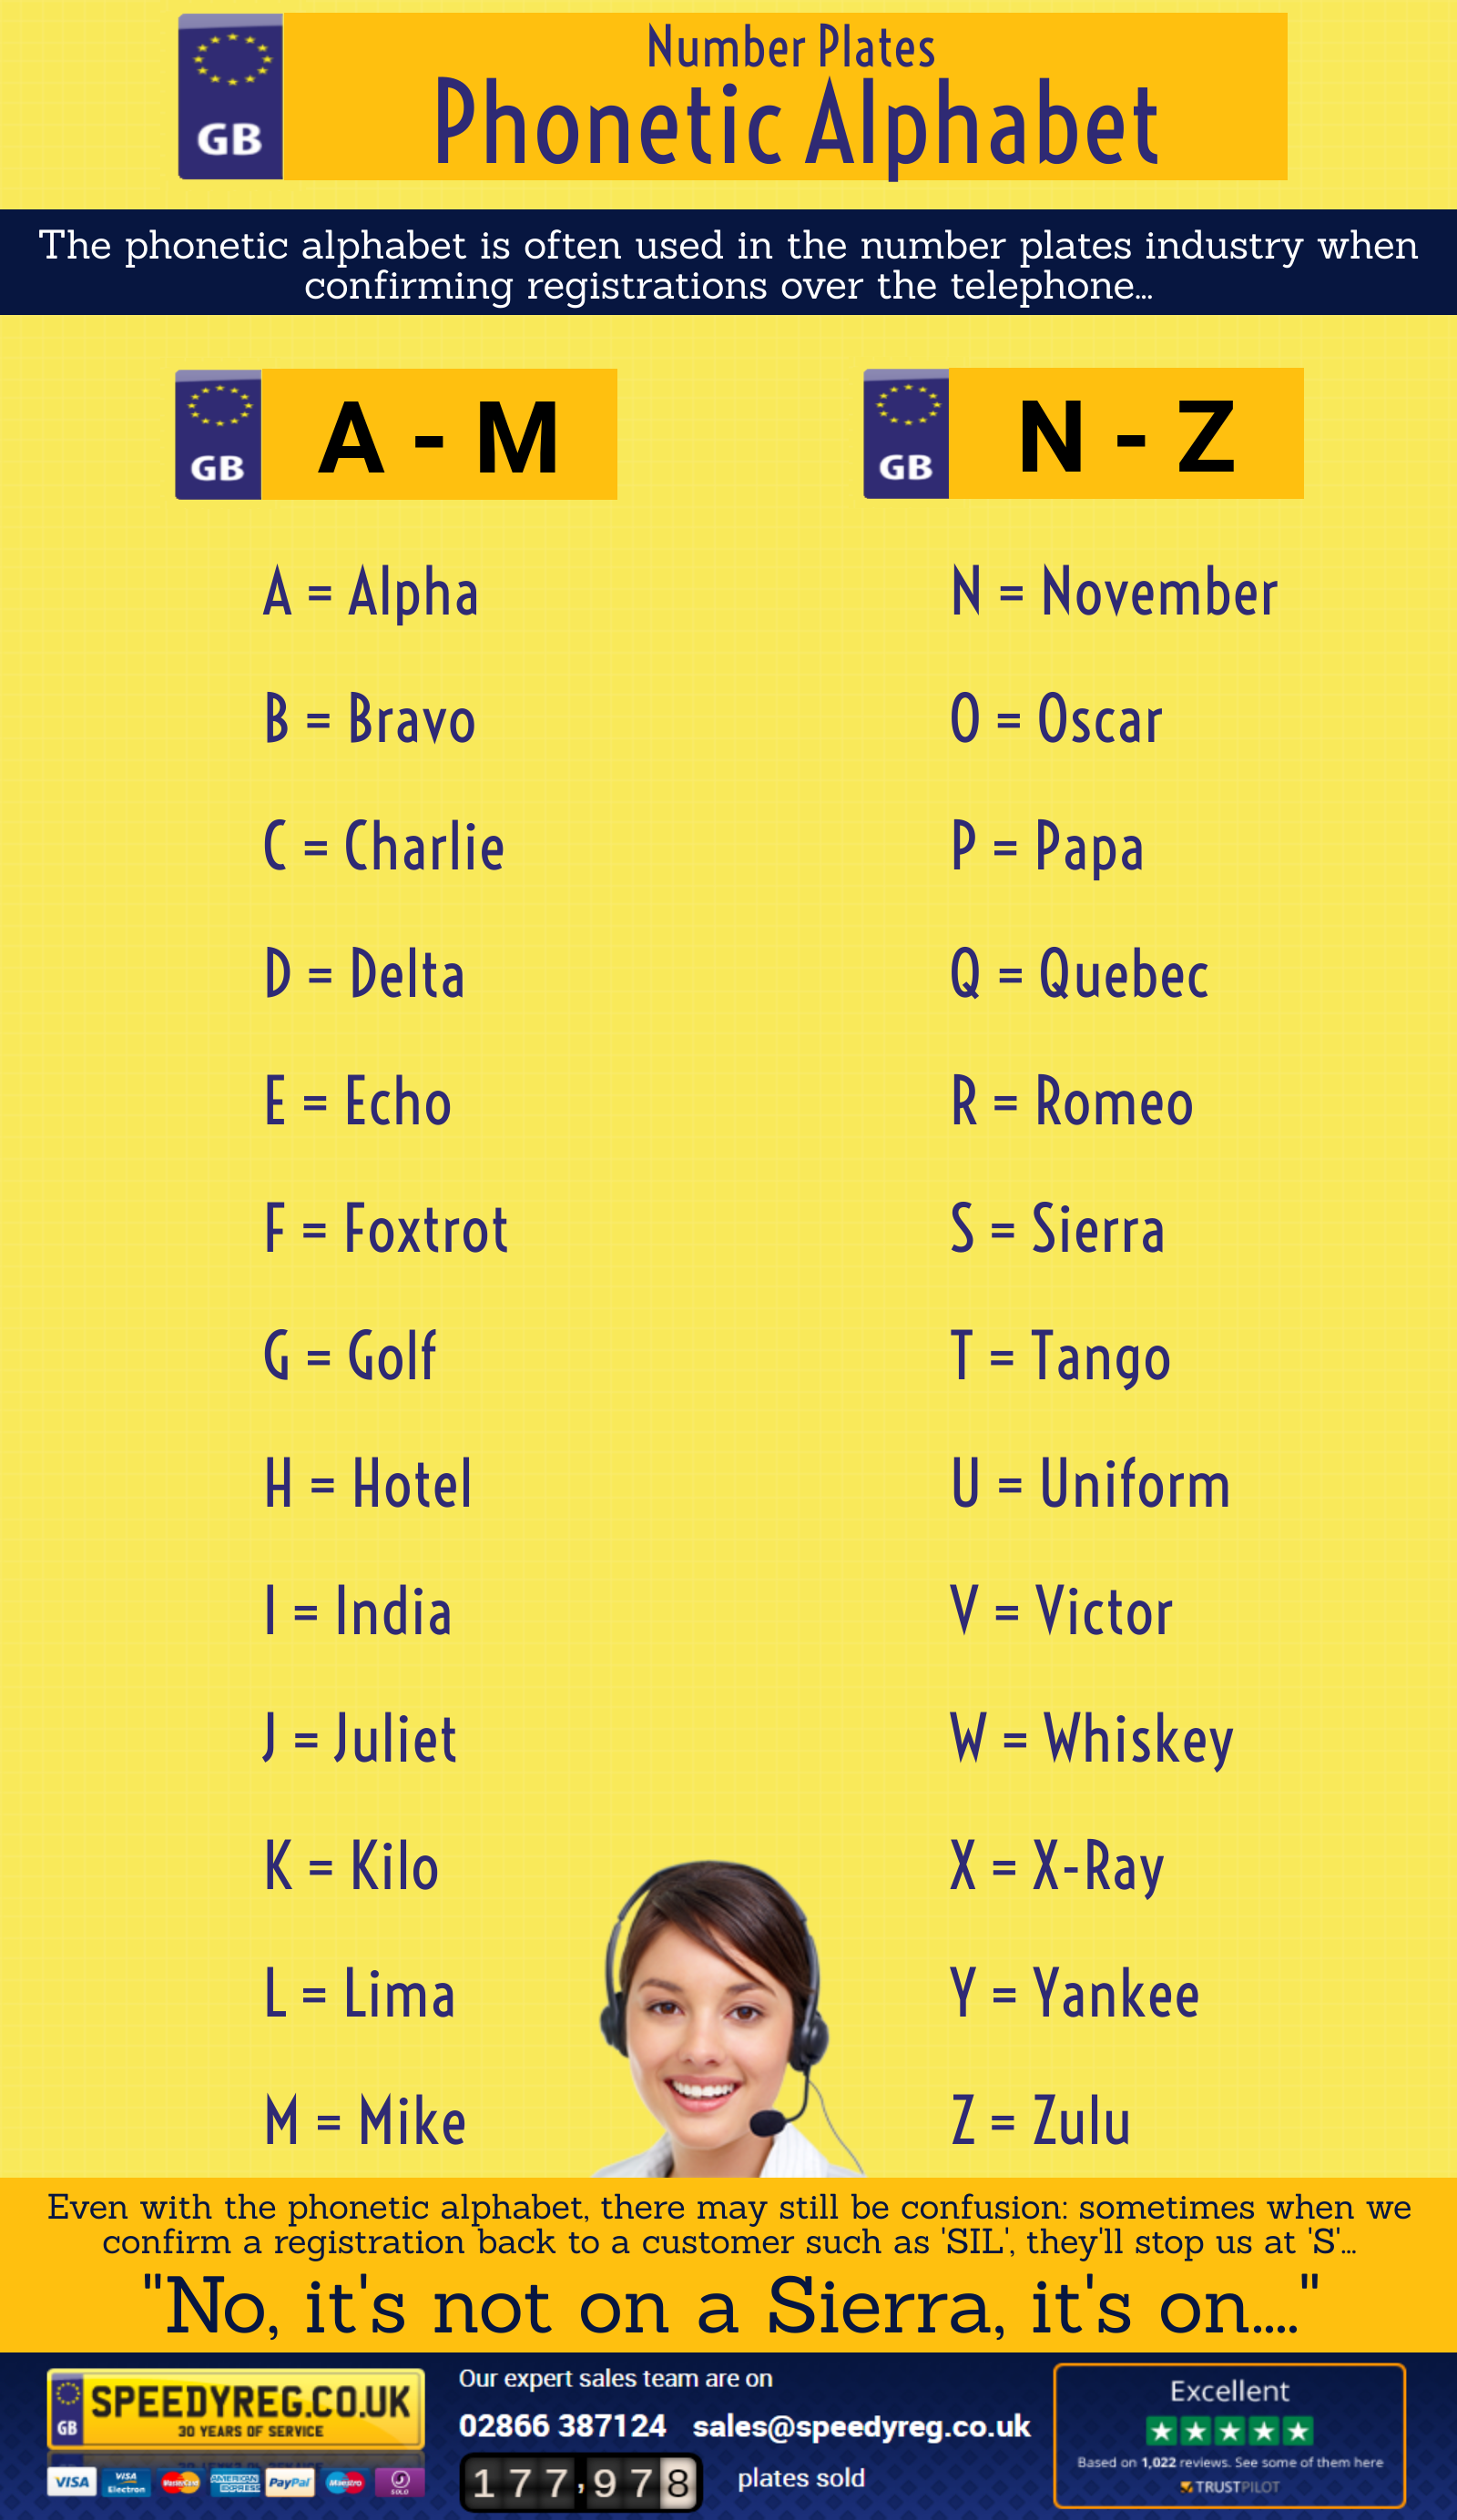 Phonetic Alphabet Infographic | Learn the Phonetic Alphabet | A-Z